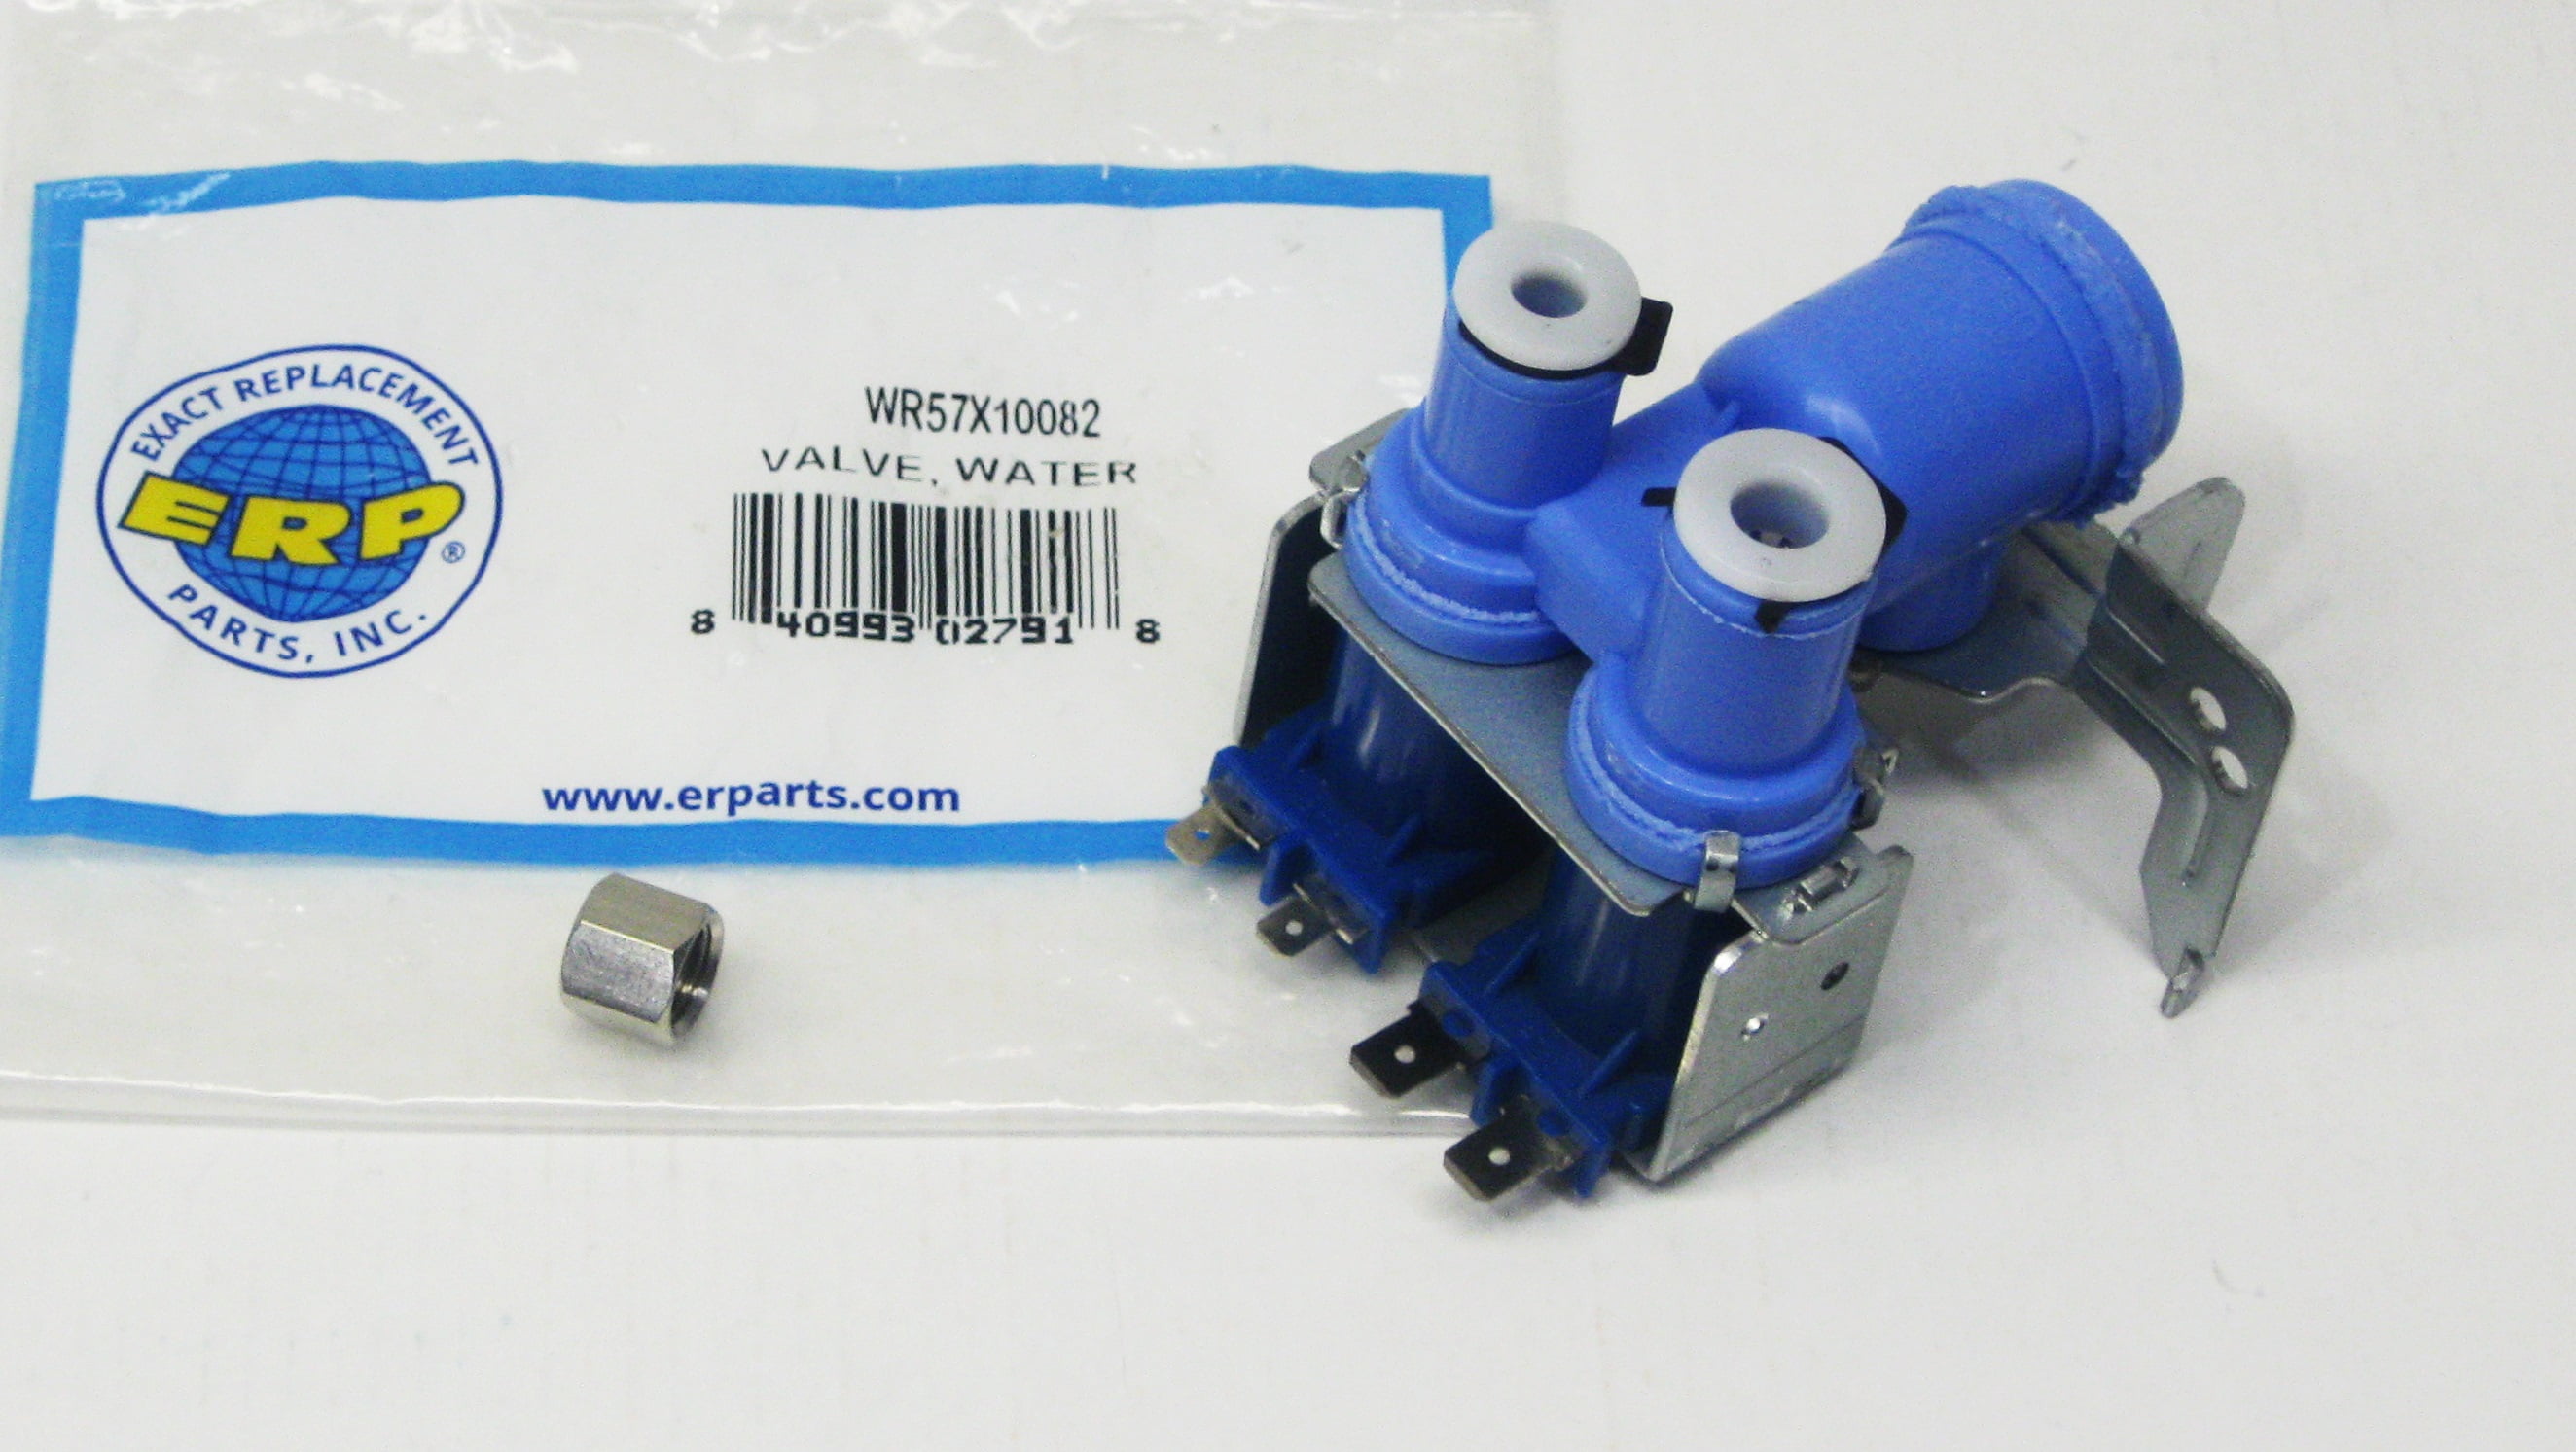 Replacement Ice Maker Water Valve for GE Part # WR57X10082 ERWR57X10082 